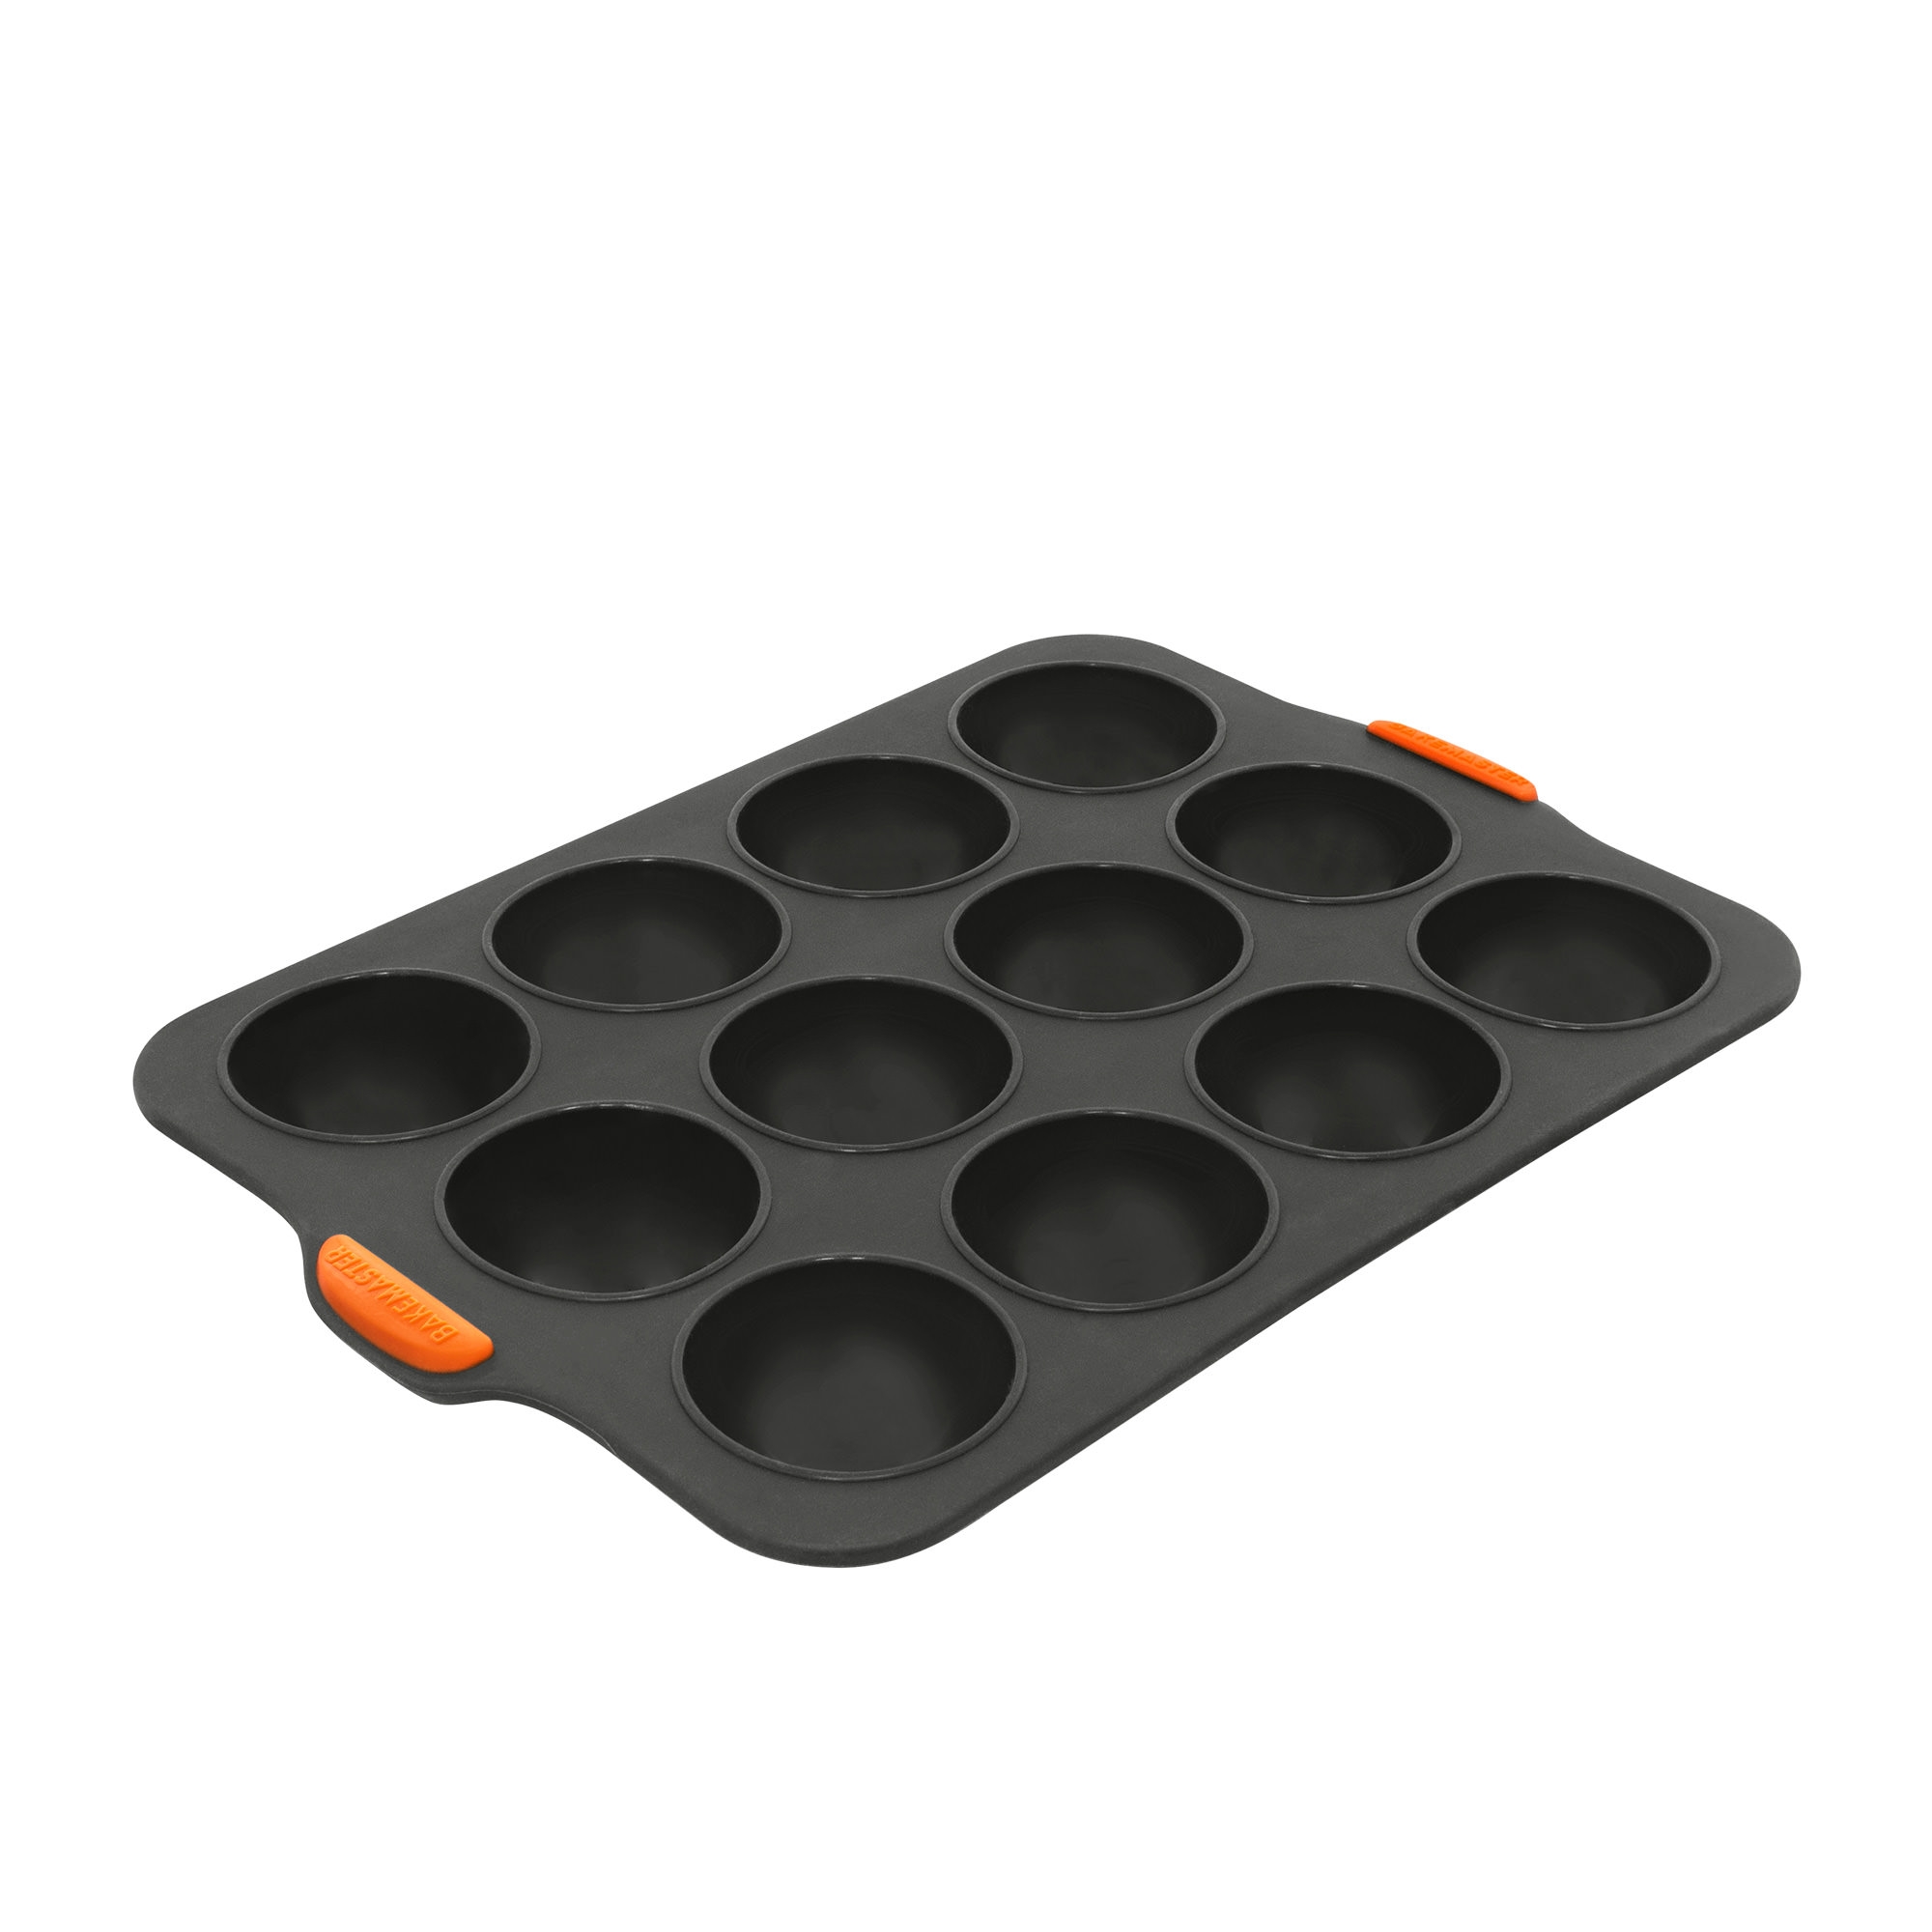 Bakemaster Silicone Dome Tray 12 Cup Image 1